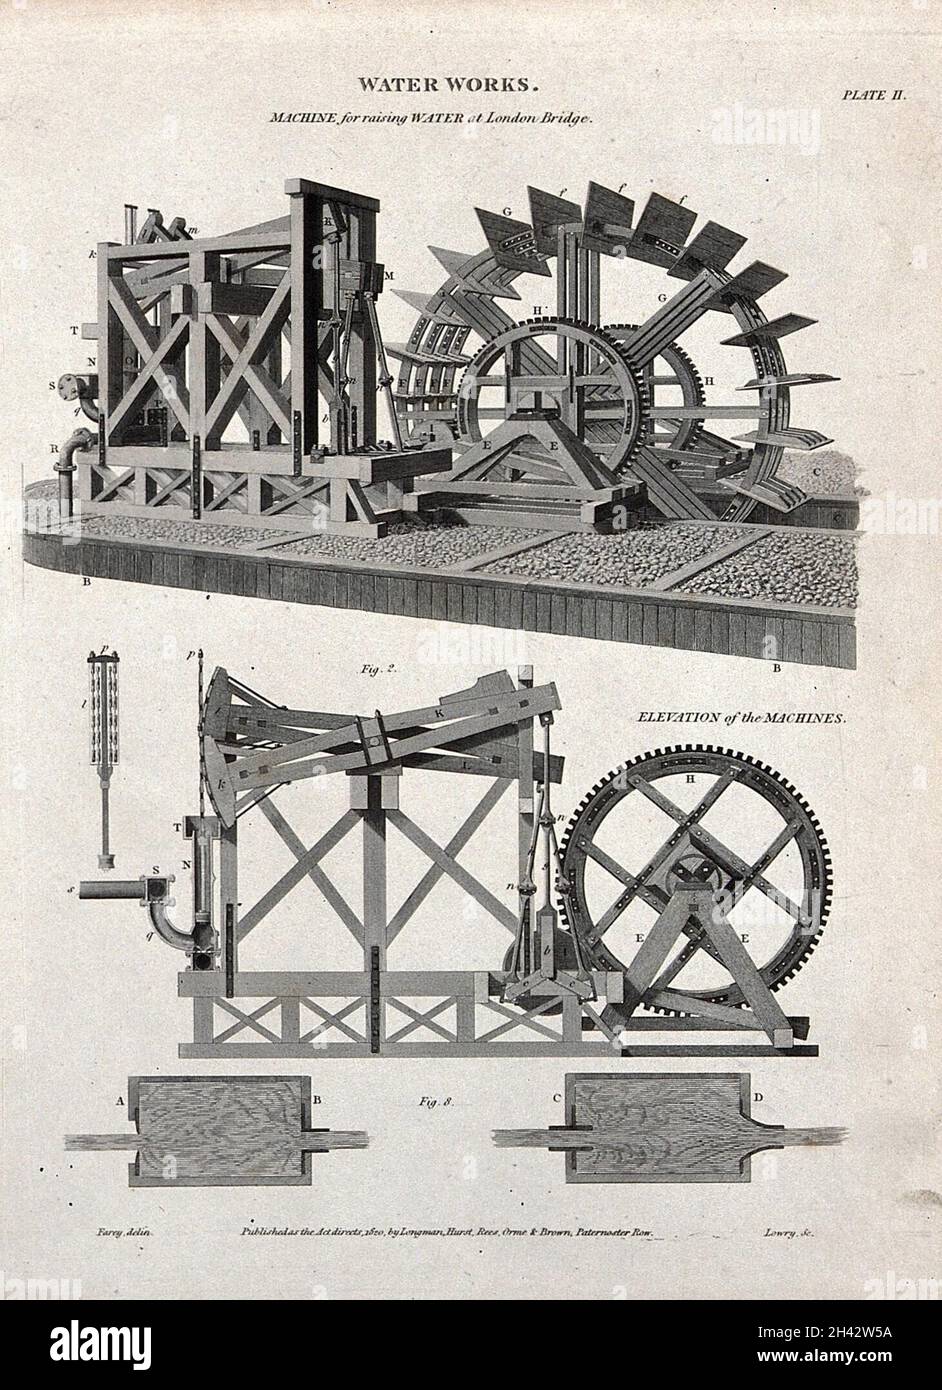 A paddle-driven beam-engine suction pump for raising water, used at London Bridge. Engraving by W. Lowry, 1820, after J. Farey. Stock Photo